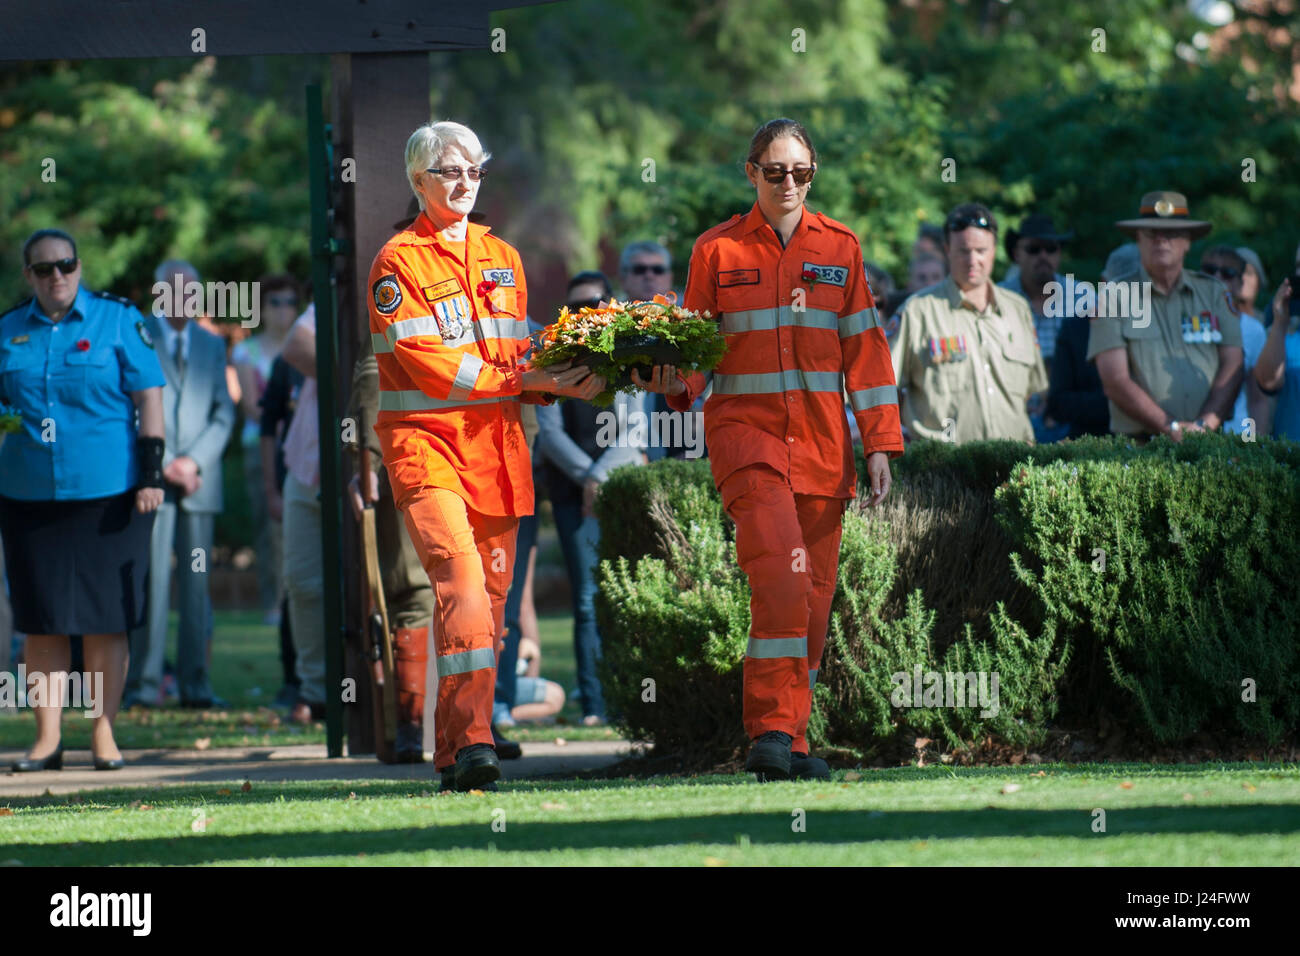 Guildford, Perth, Western Australia, Australia. 25th April, 2017. Western Australian State Emergency Services (SES) volunteers carrying floral wreath at ANZAC Day service in Guildford, Western Australia.    Sheldon Levis/Alamy Live News Stock Photo